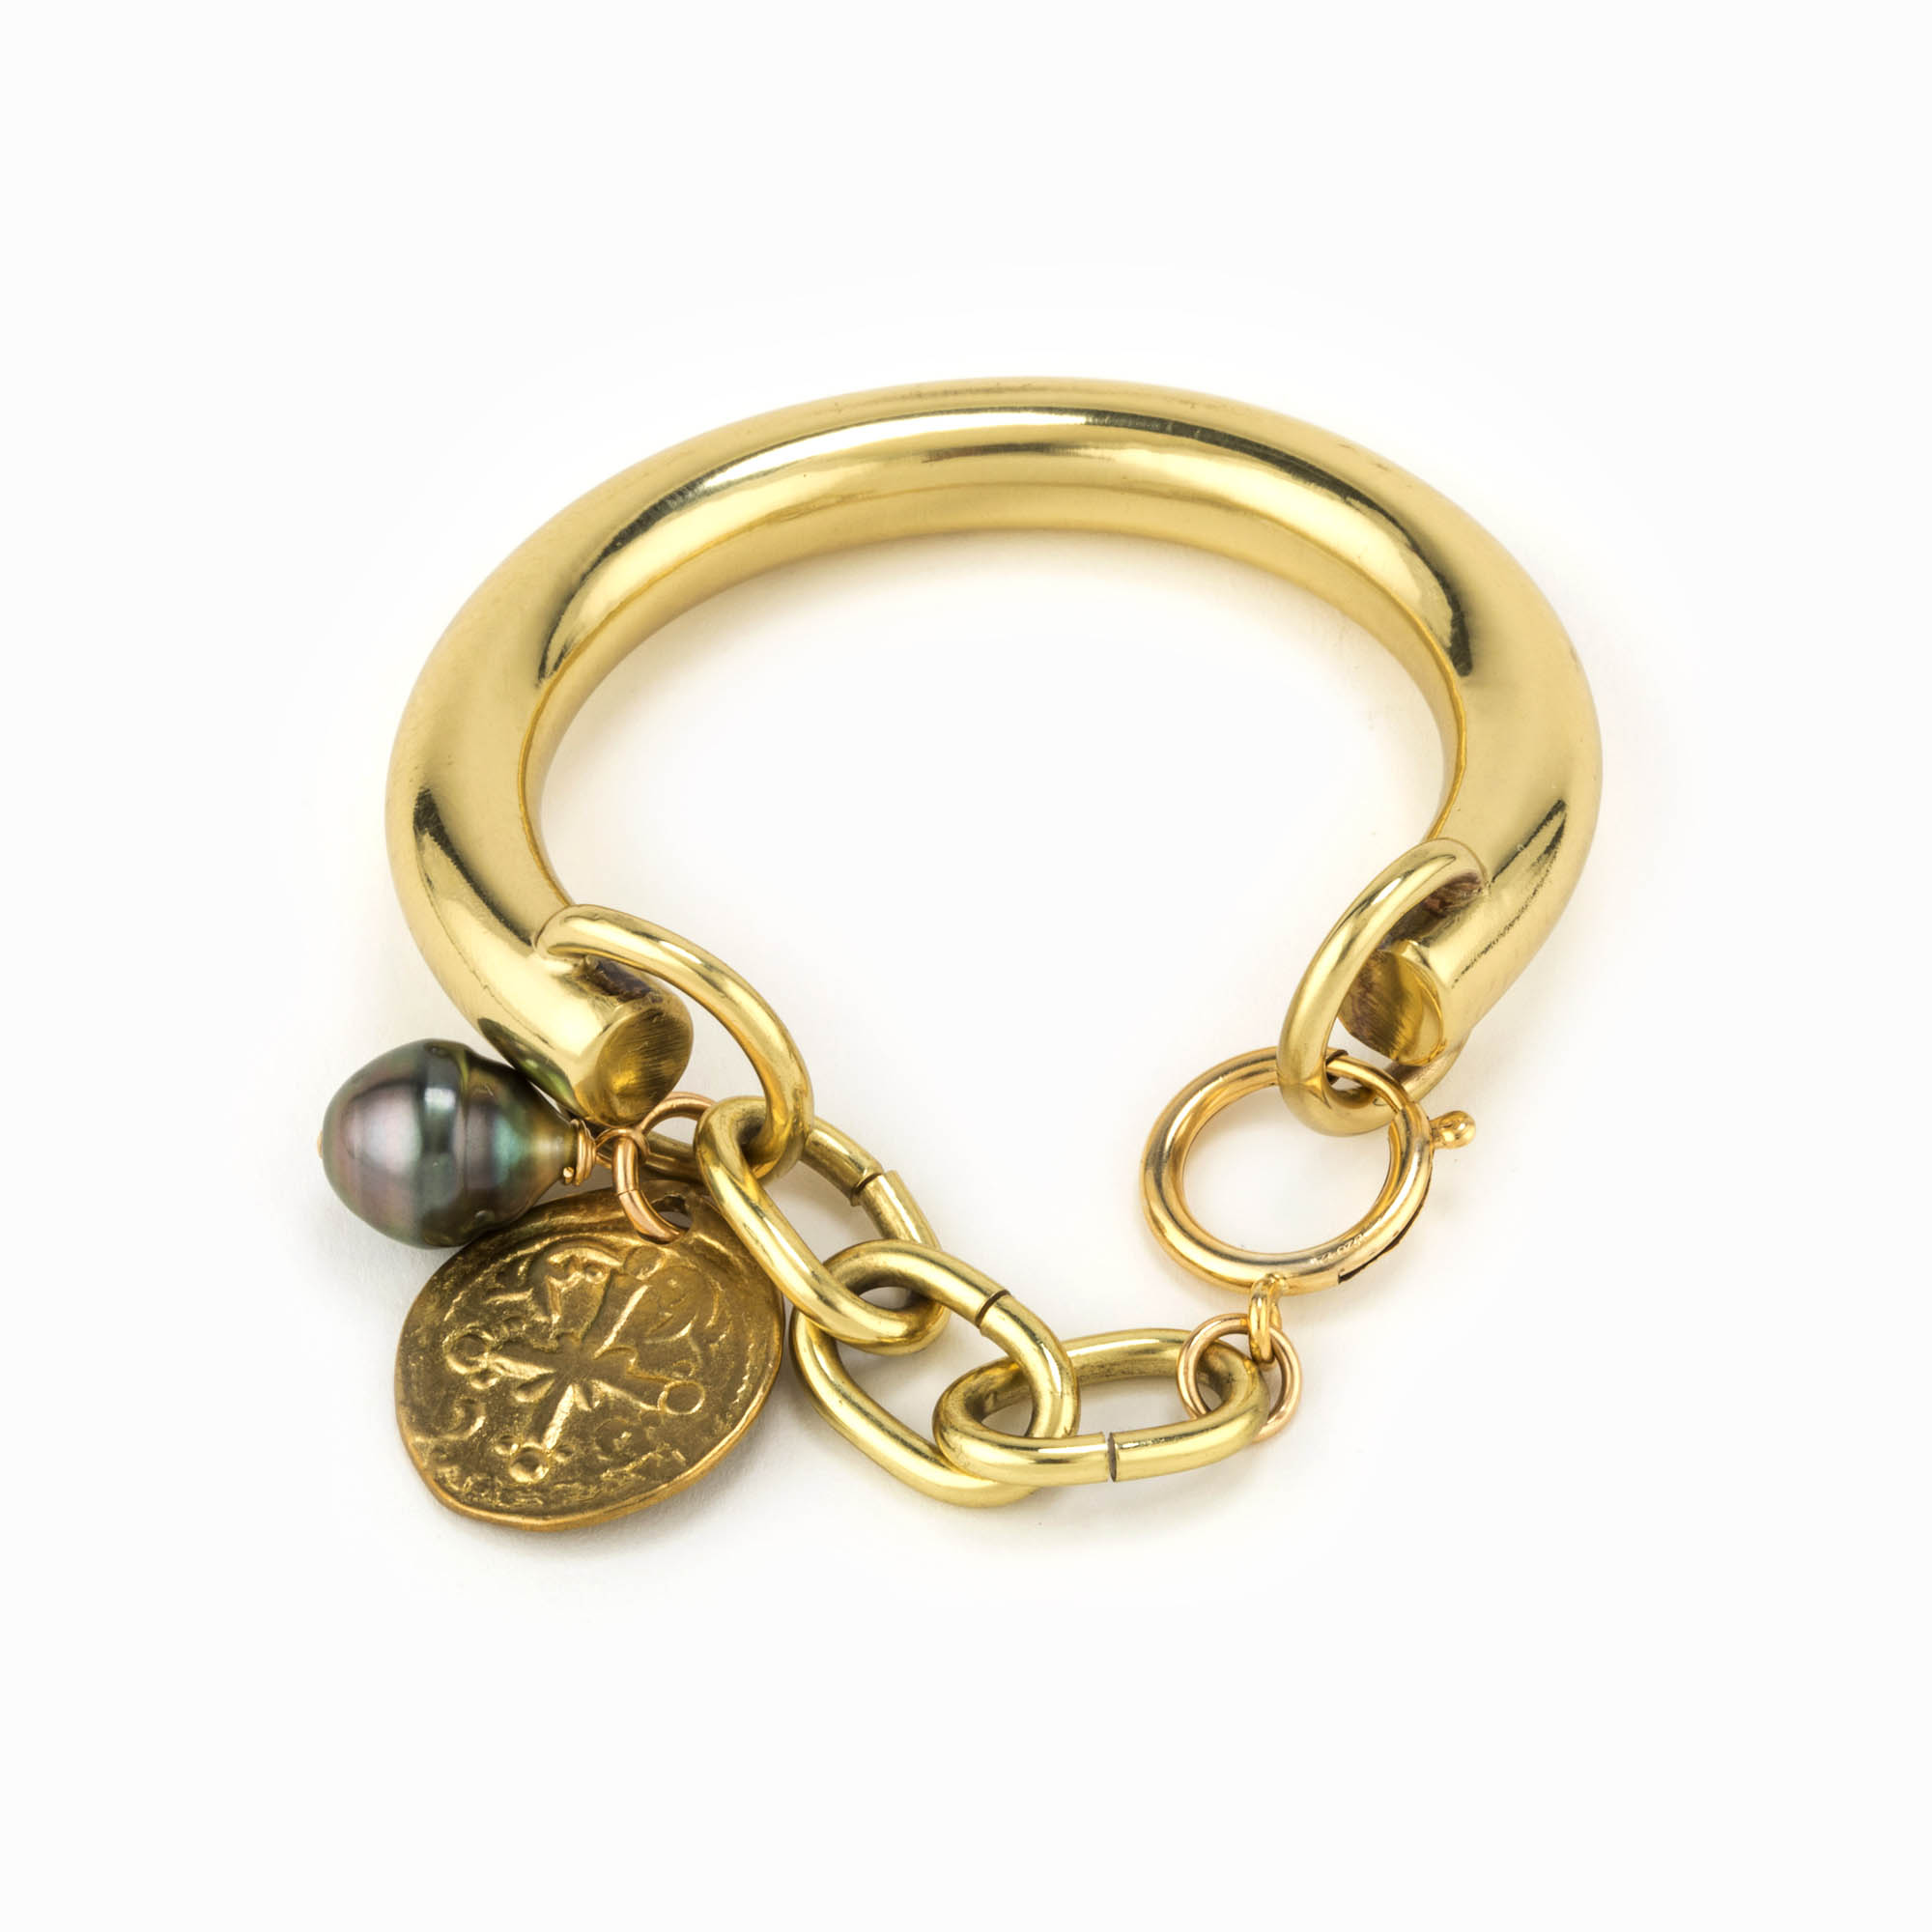 Featured image for “Blue Bell Brass Bracelet”